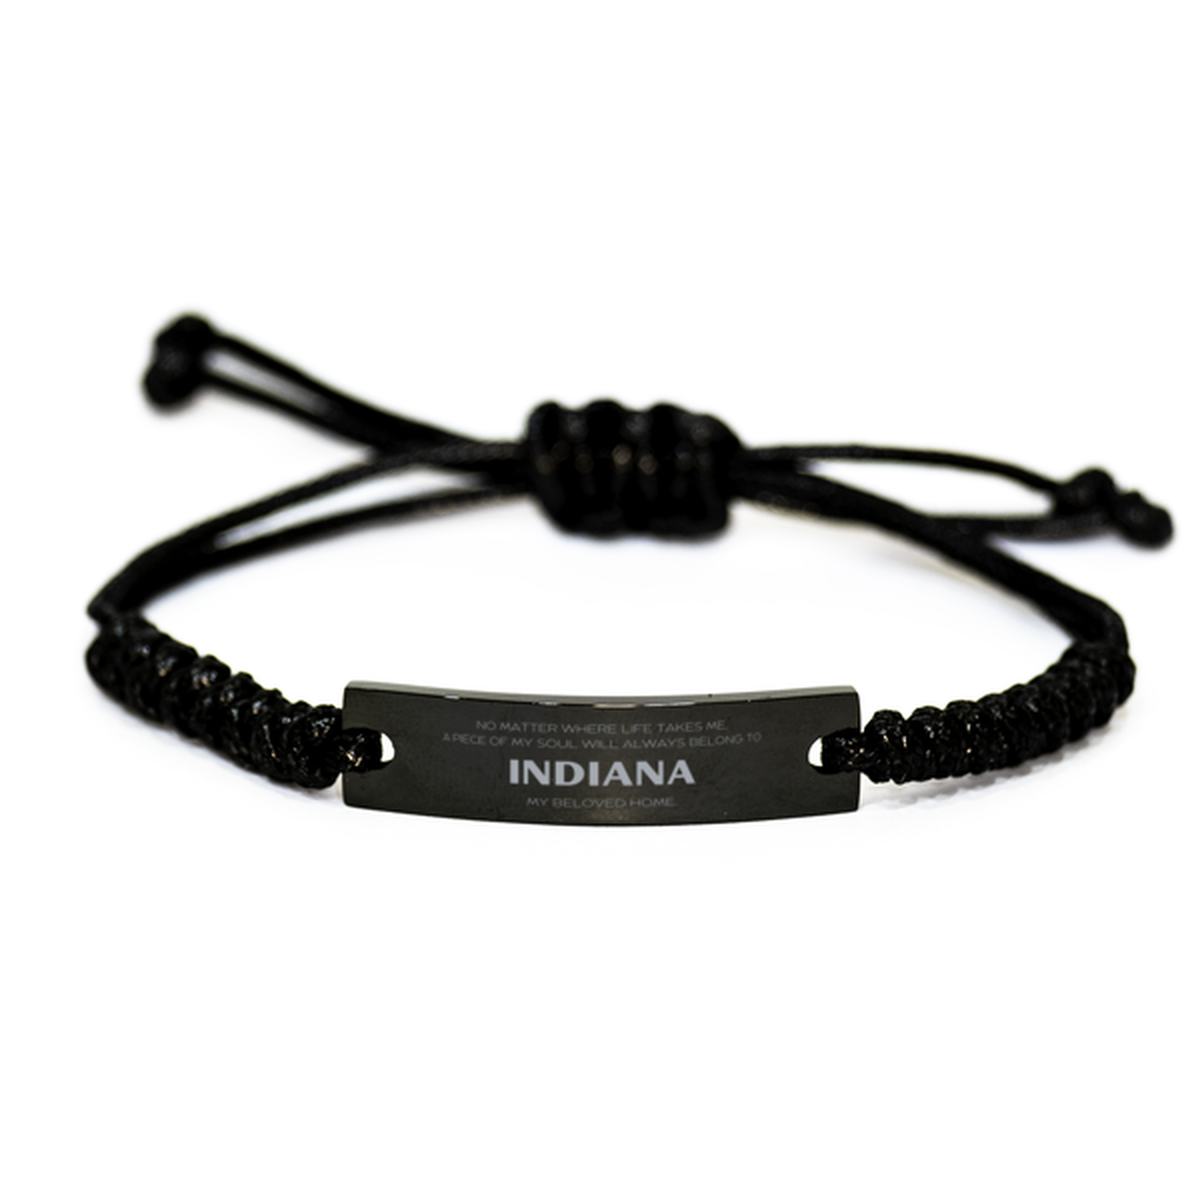 Love Indiana State Gifts, My soul will always belong to Indiana, Proud Black Rope Bracelet, Birthday Unique Gifts For Indiana Men, Women, Friends